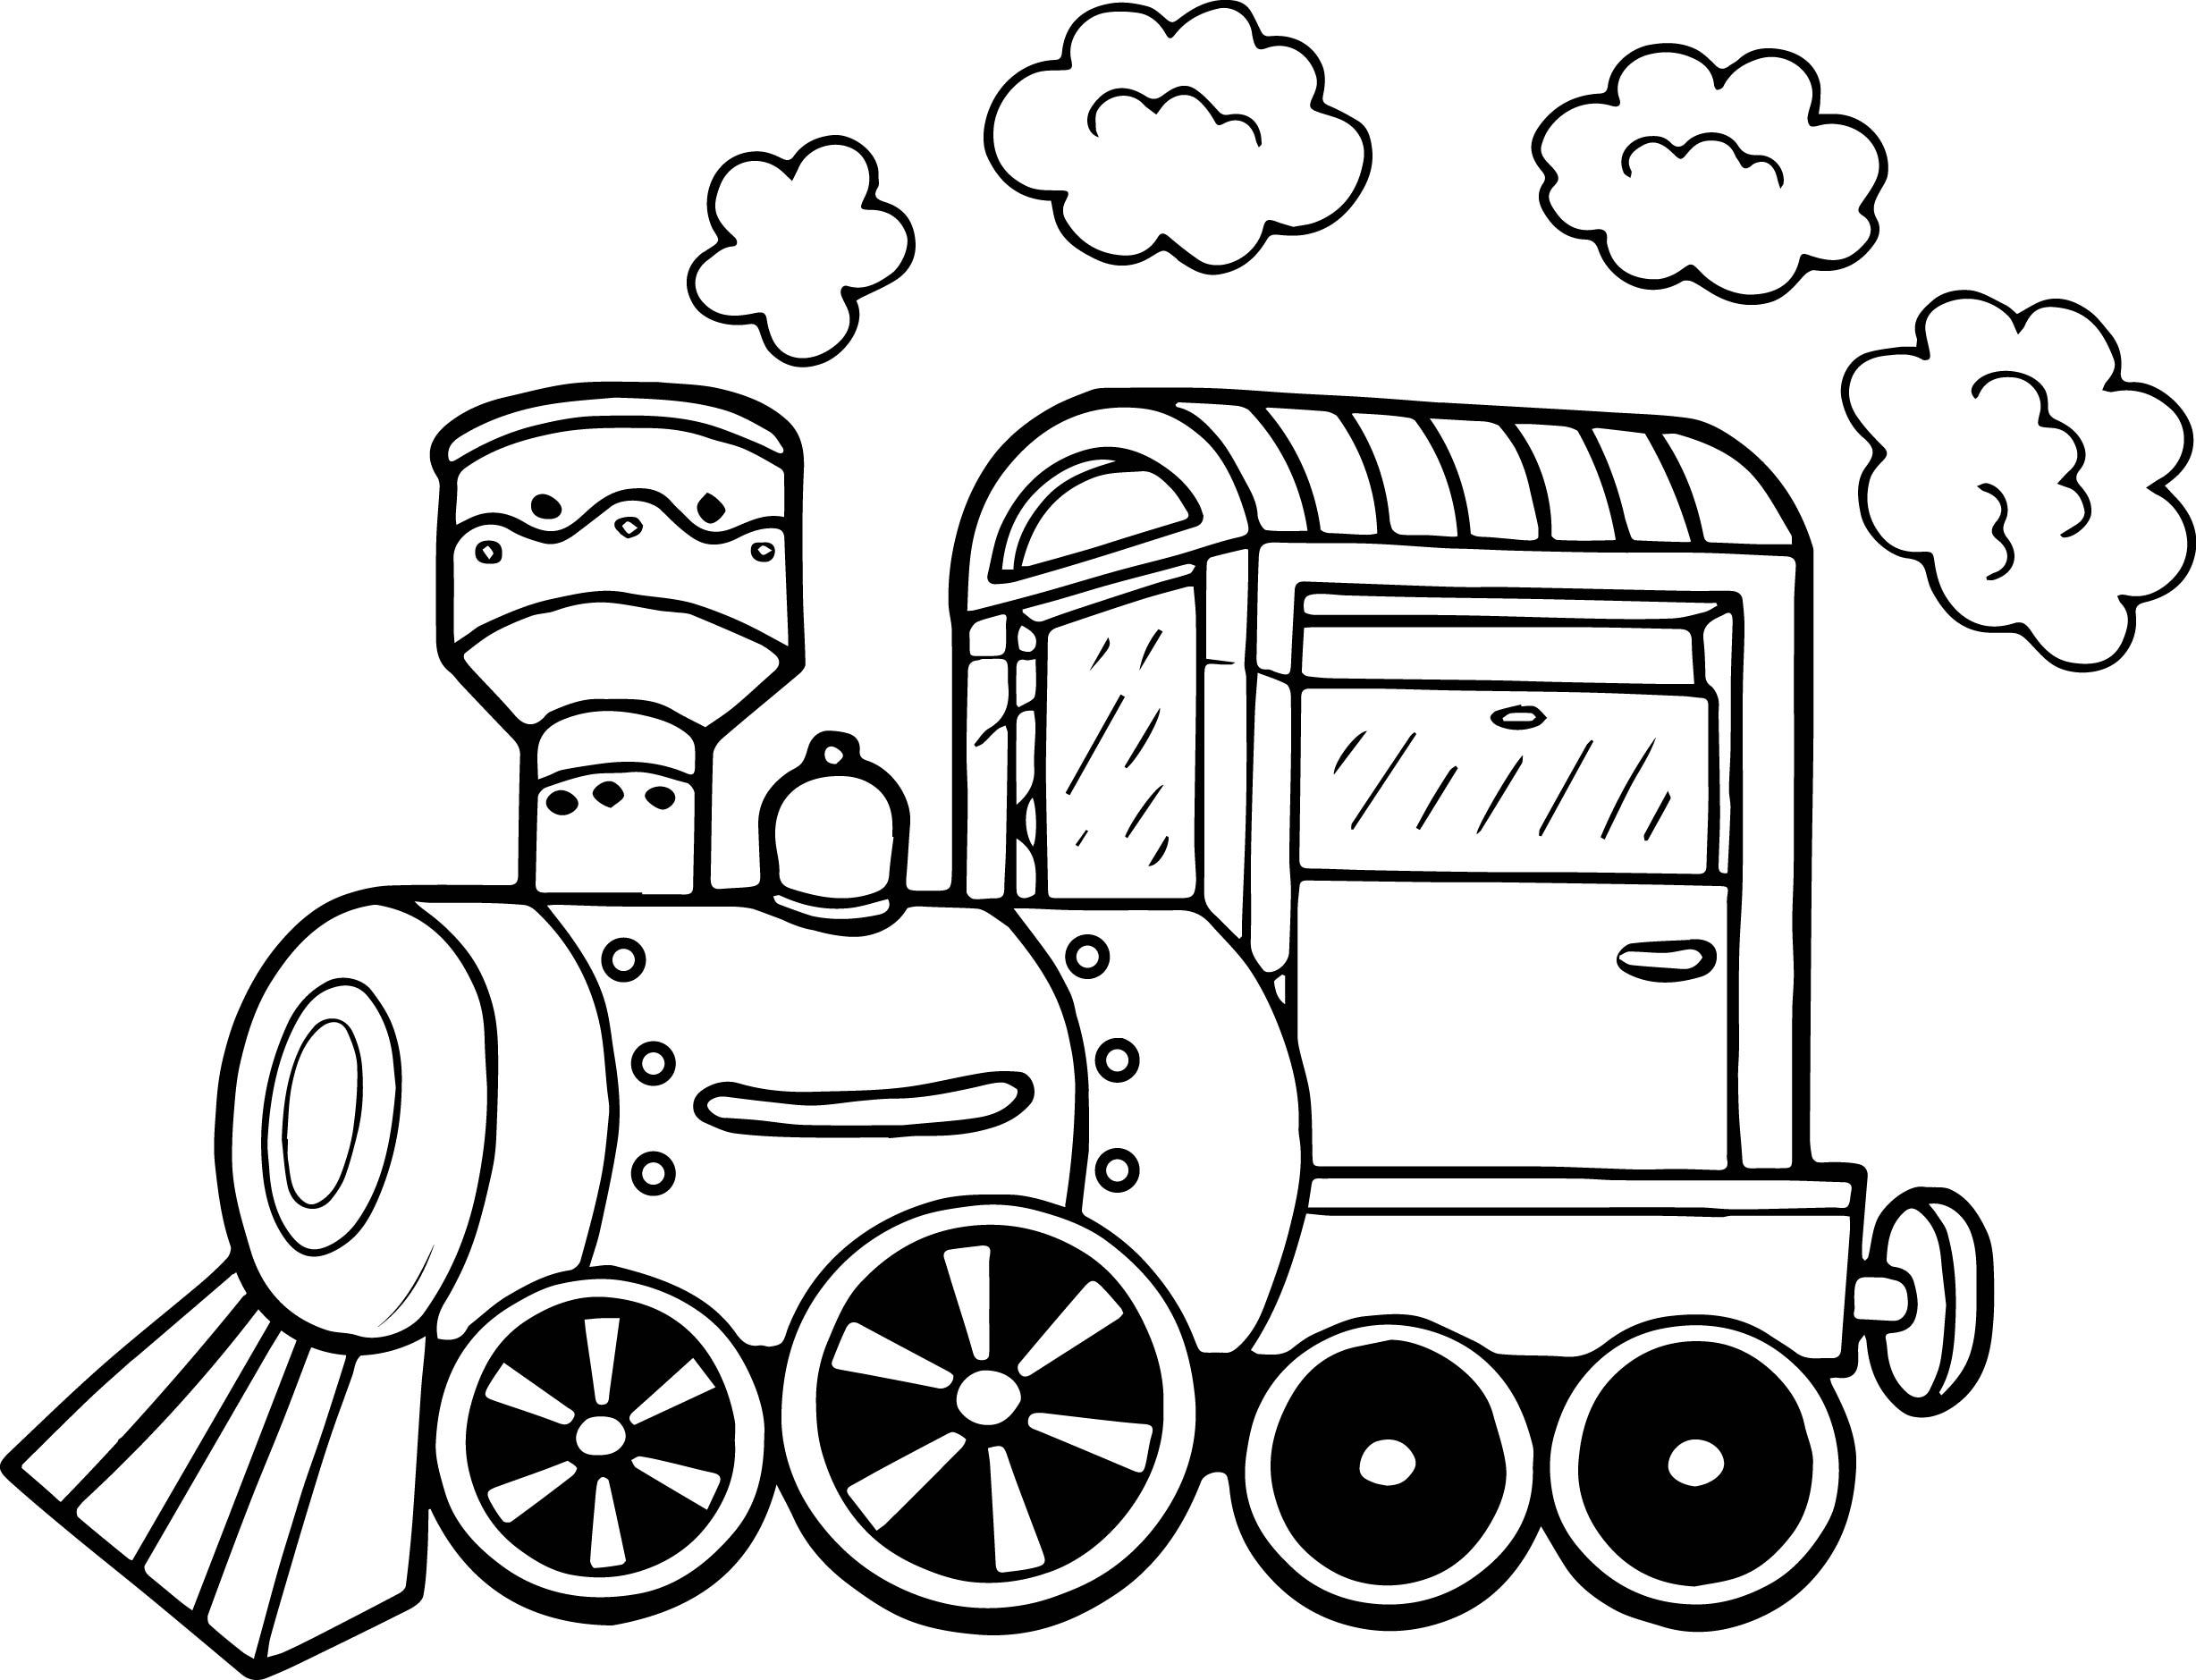 Steam Train Coloring Pages at GetColorings.com | Free ...